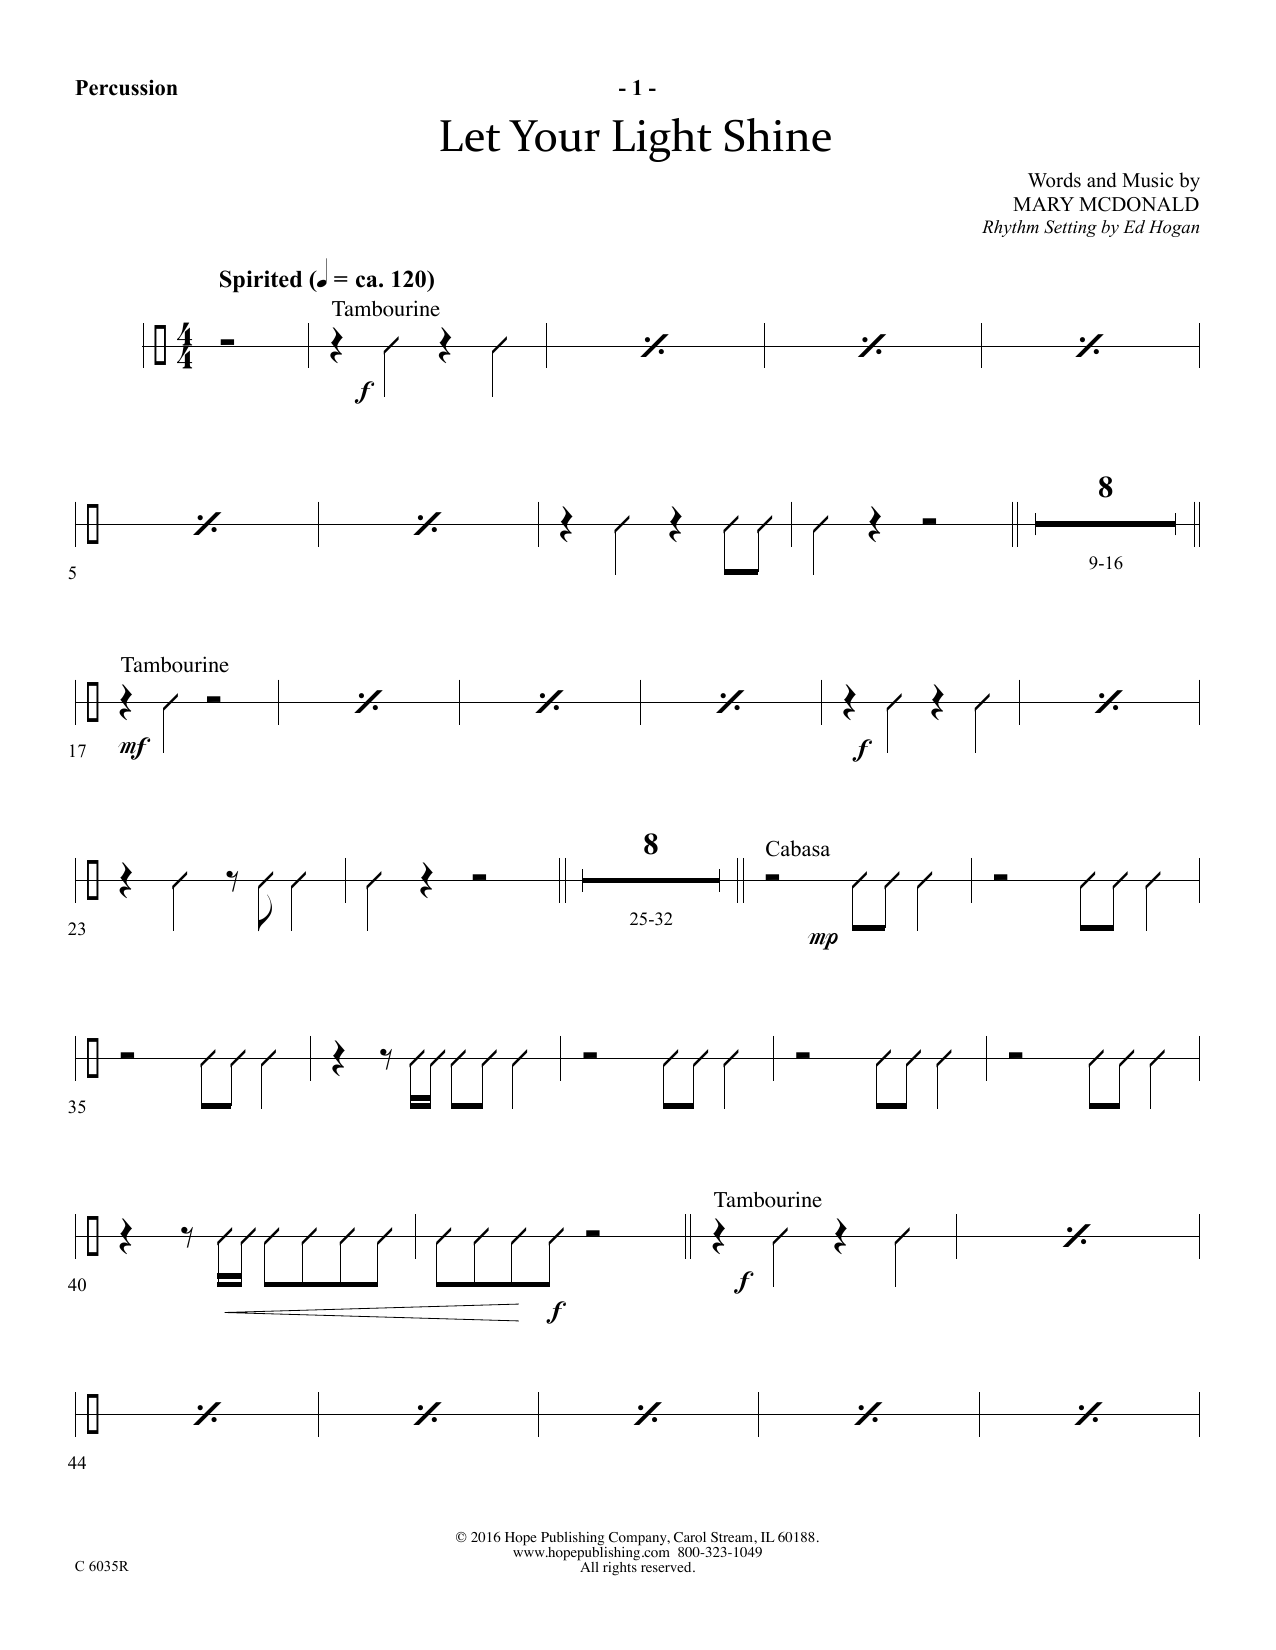 Download Mary McDonald Let Your Light Shine - Percussion Sheet Music